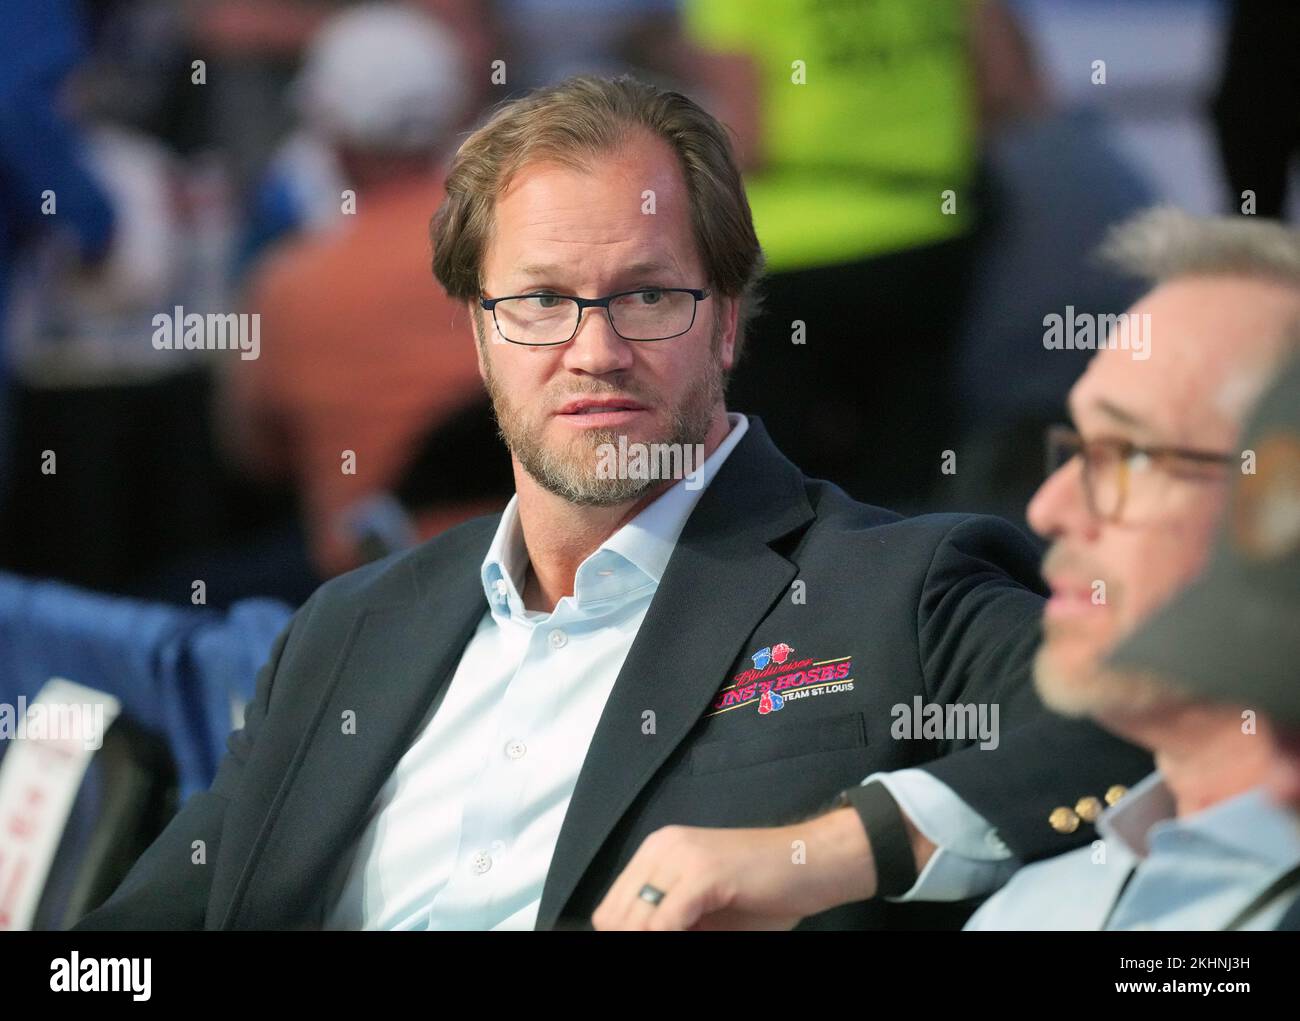 St. Louis, United States. 23rd Nov, 2022. National Hockey League Hall of Fame member Chris Pronger talks with ESPN broadcaster Joe Buck during the Annual Guns N' Hoses Boxing Showdown at the Enterprise Center in St. Louis on Wednesday, November 23, 2022. Guns N' Hoses, in its 35th year, pits firefighters vs policemen in boxing matches, to benefit The Backstoppers, an organization that provides financial support to families that have lost first responder family members in the line of duty. Photo by Bill Greenblatt/UPI Credit: UPI/Alamy Live News Stock Photo